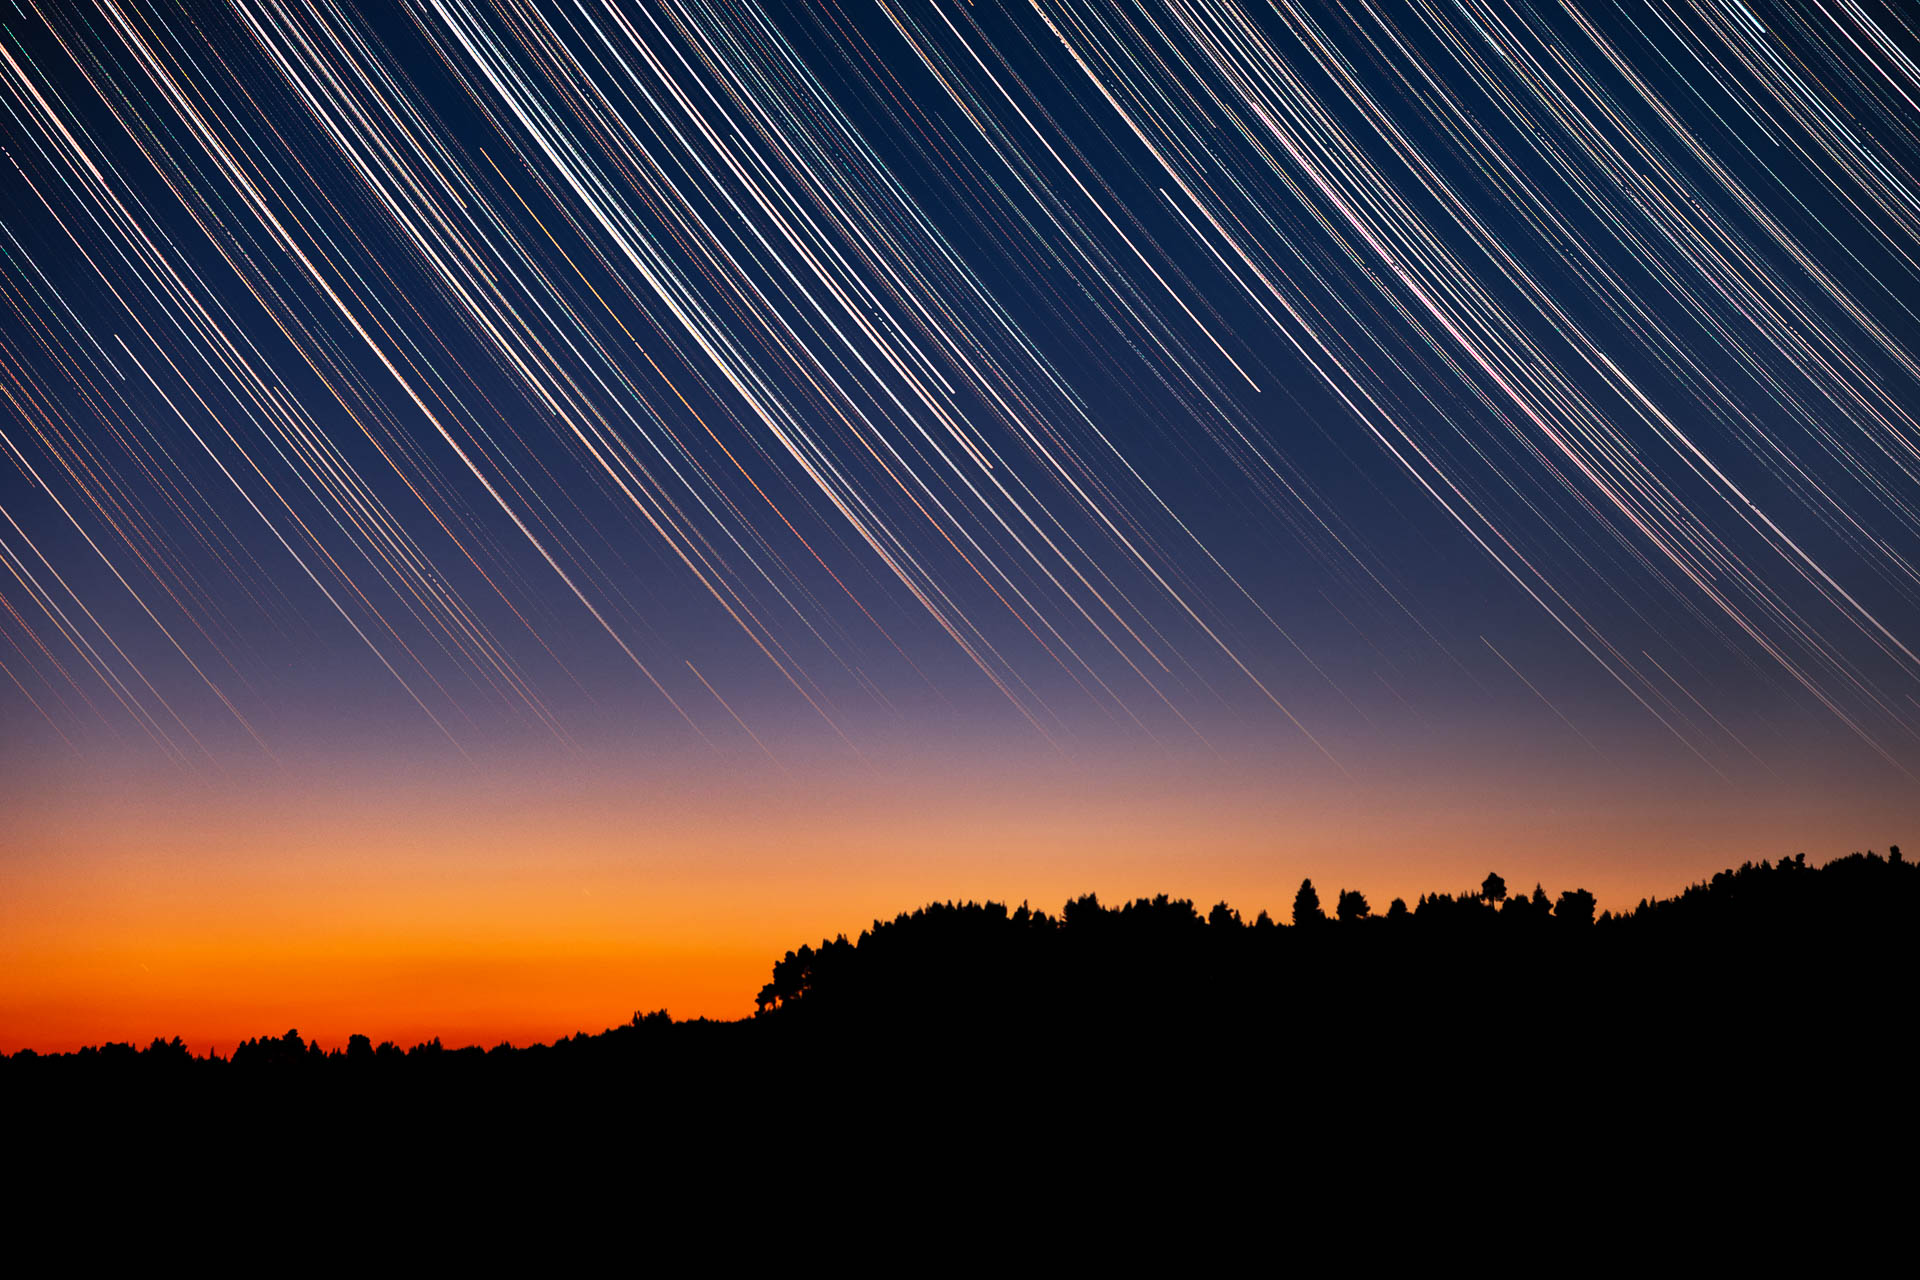 Startrails over trees silhouettes